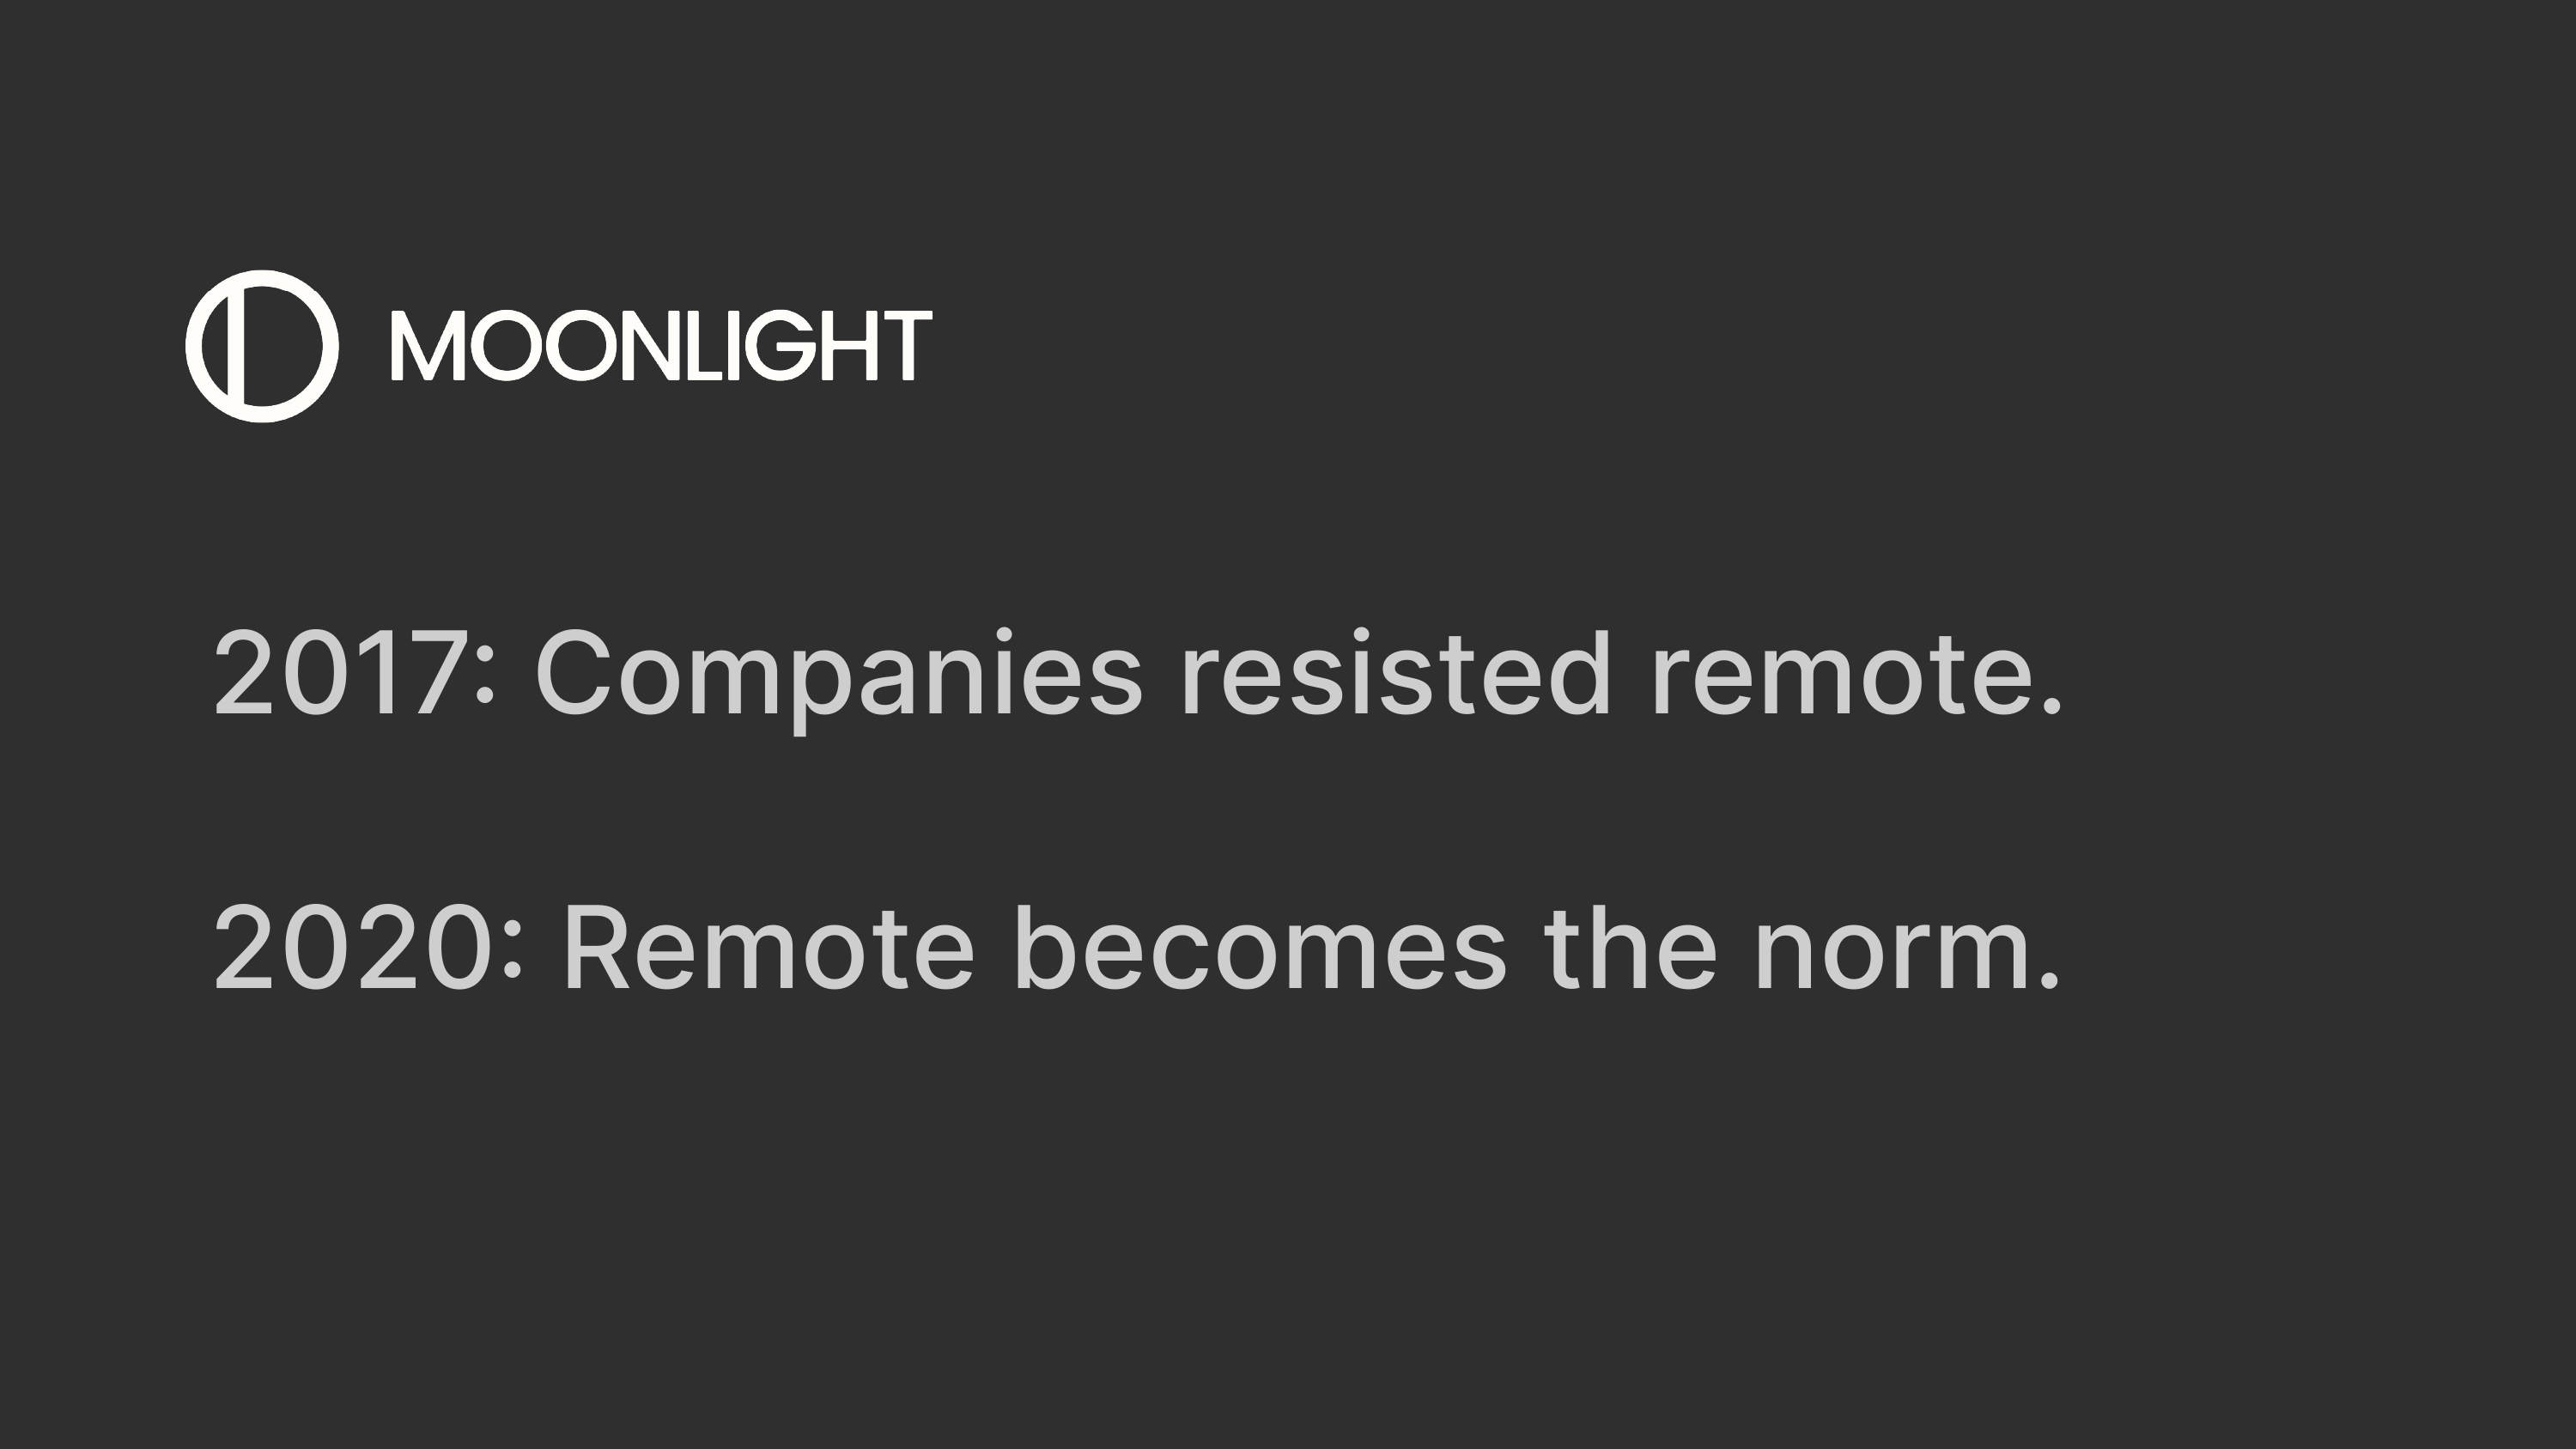 Moonlight's history: Companies resisted remote, then it became the norm.